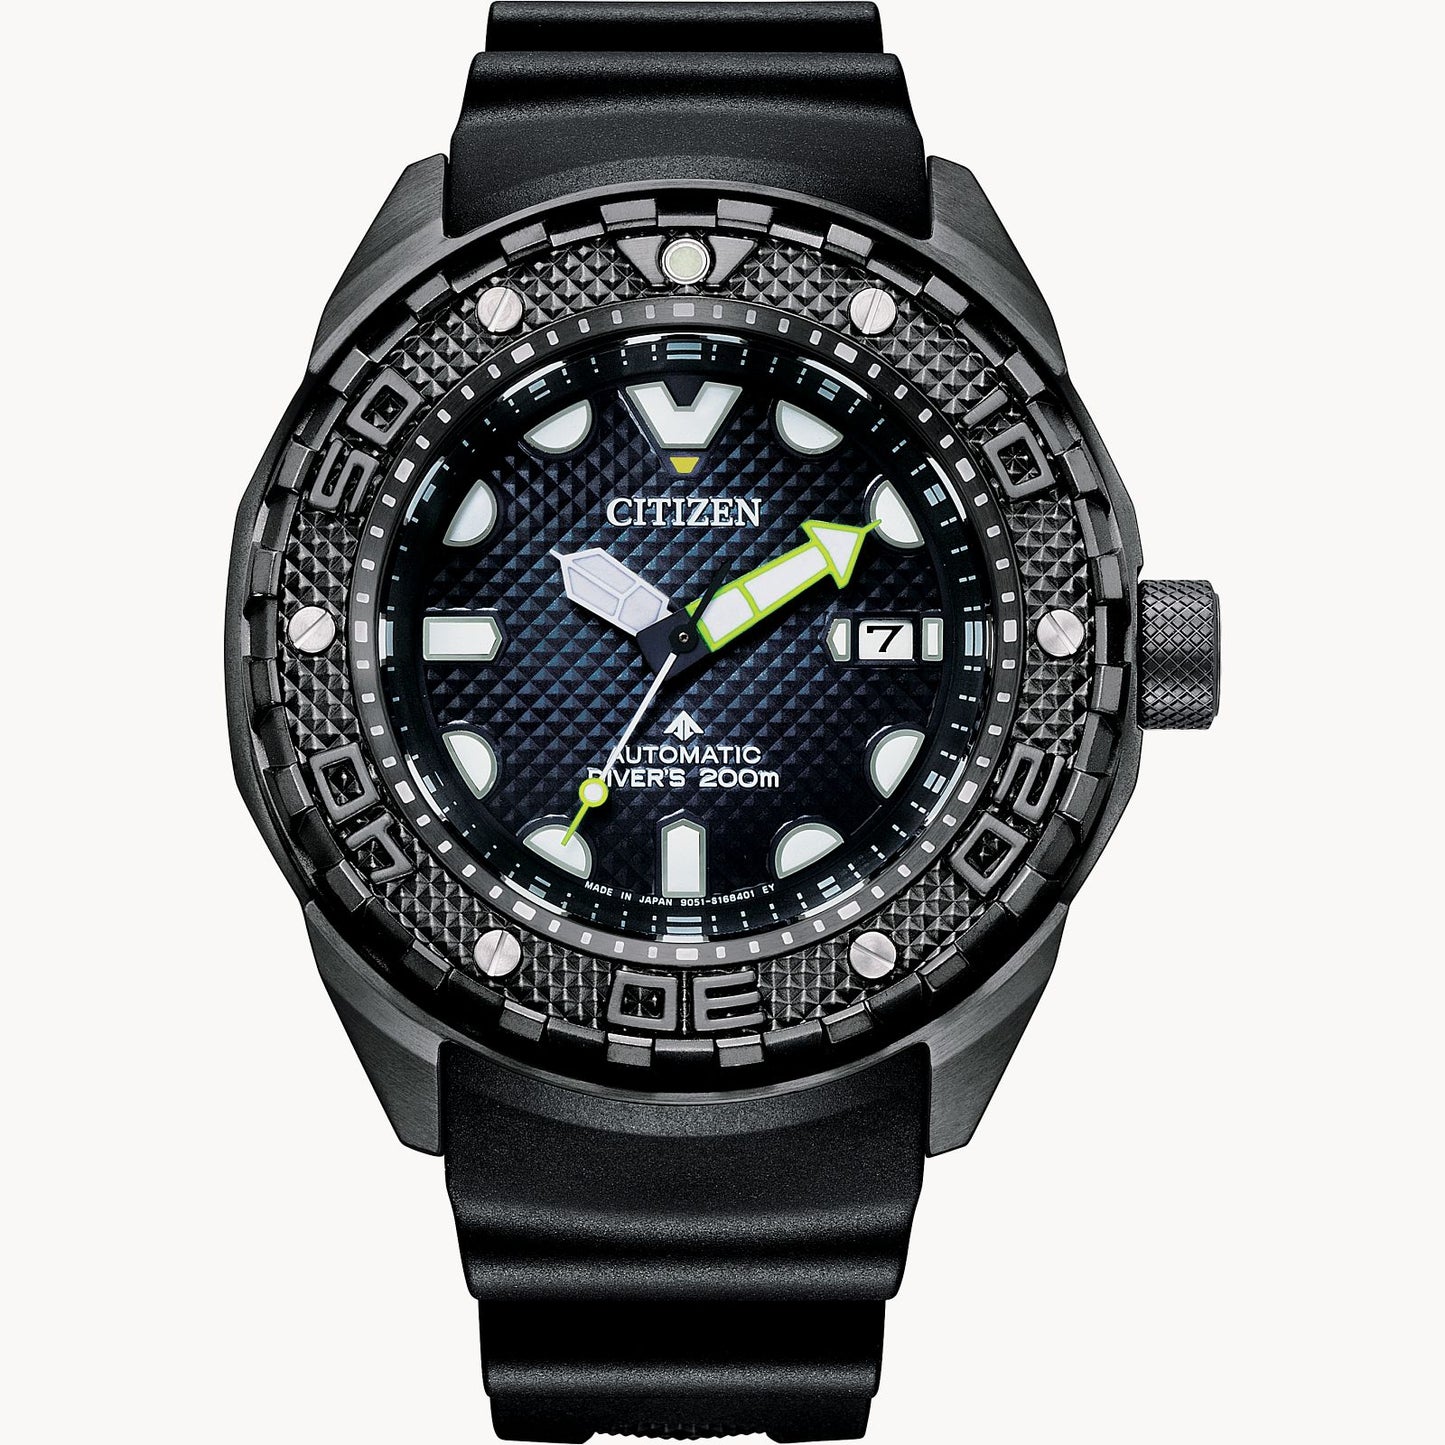 Load image into Gallery viewer, Promaster Dive Automatic Citizen Watch NB6005-05L
